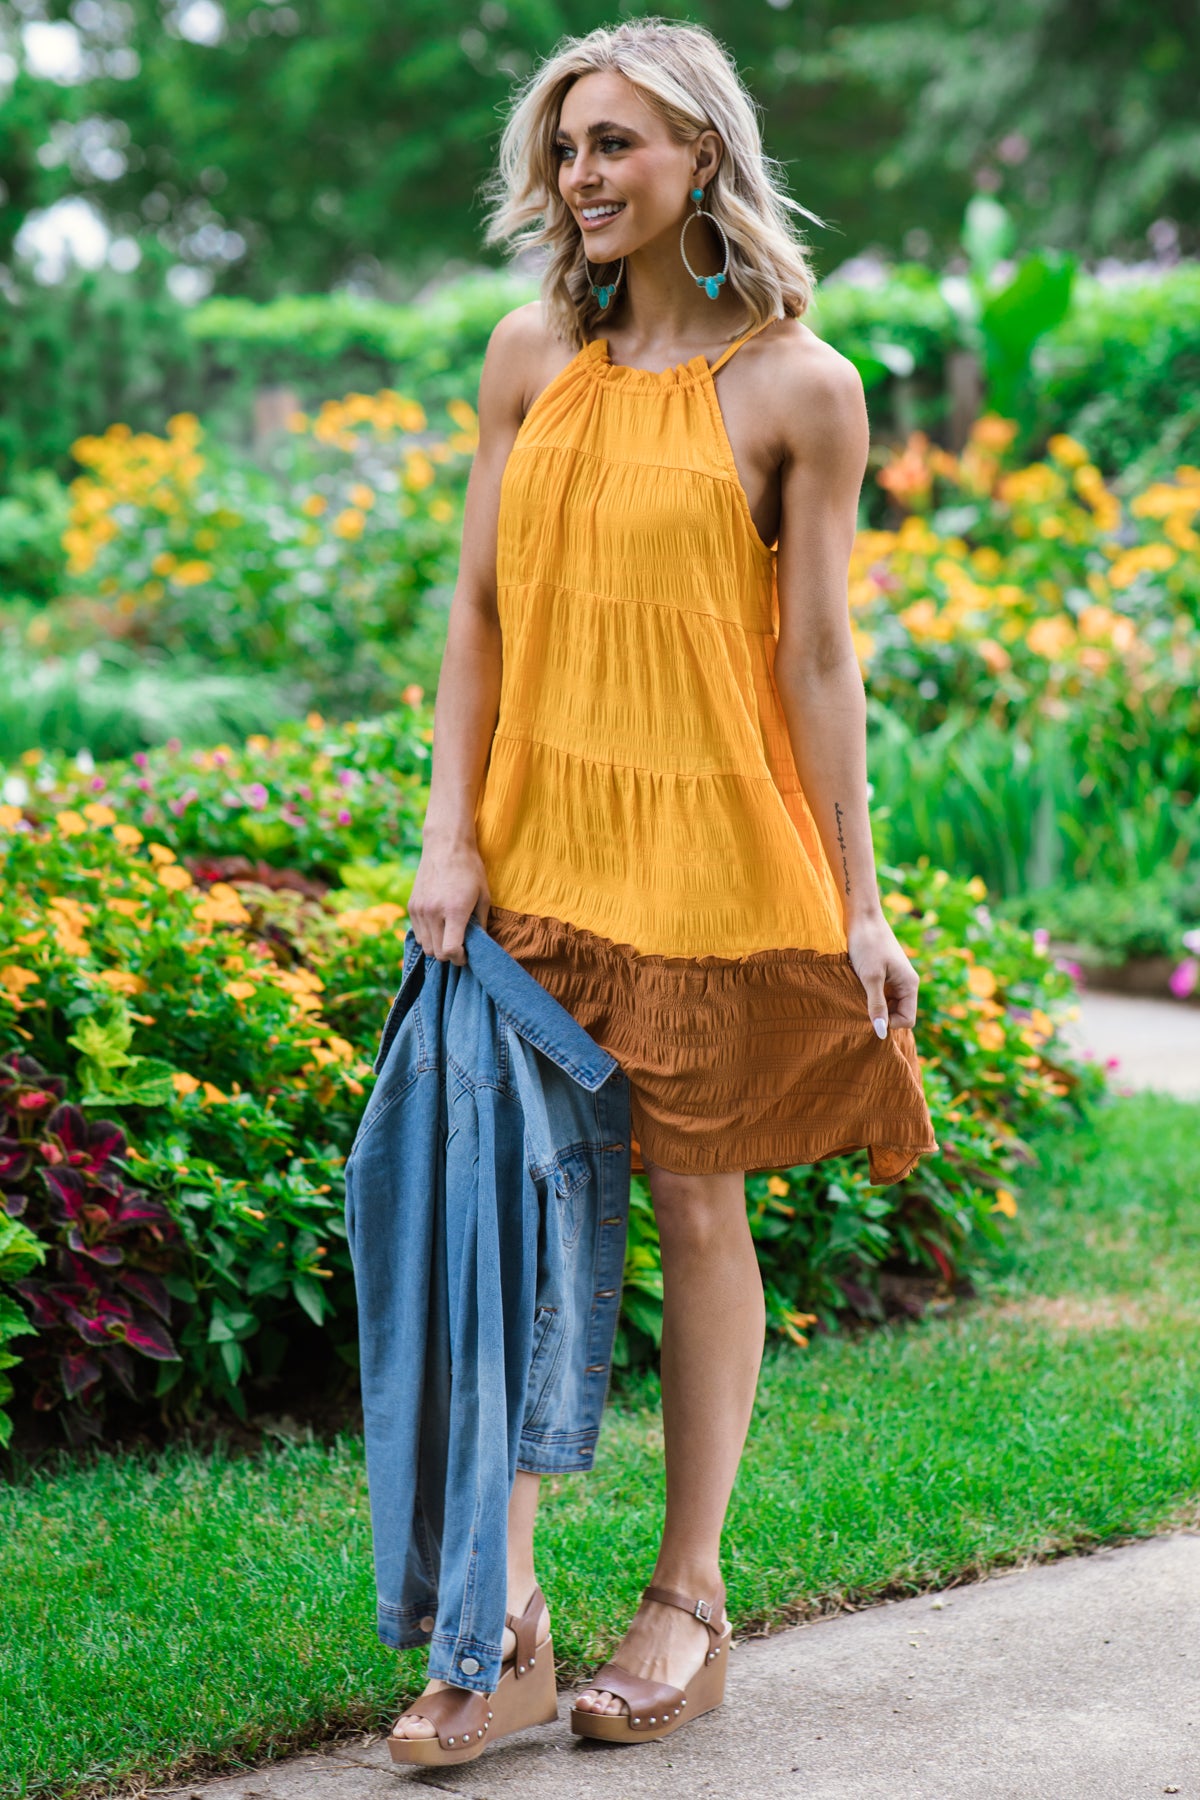 Orange and Cinnamon Colorblock Dress - Filly Flair